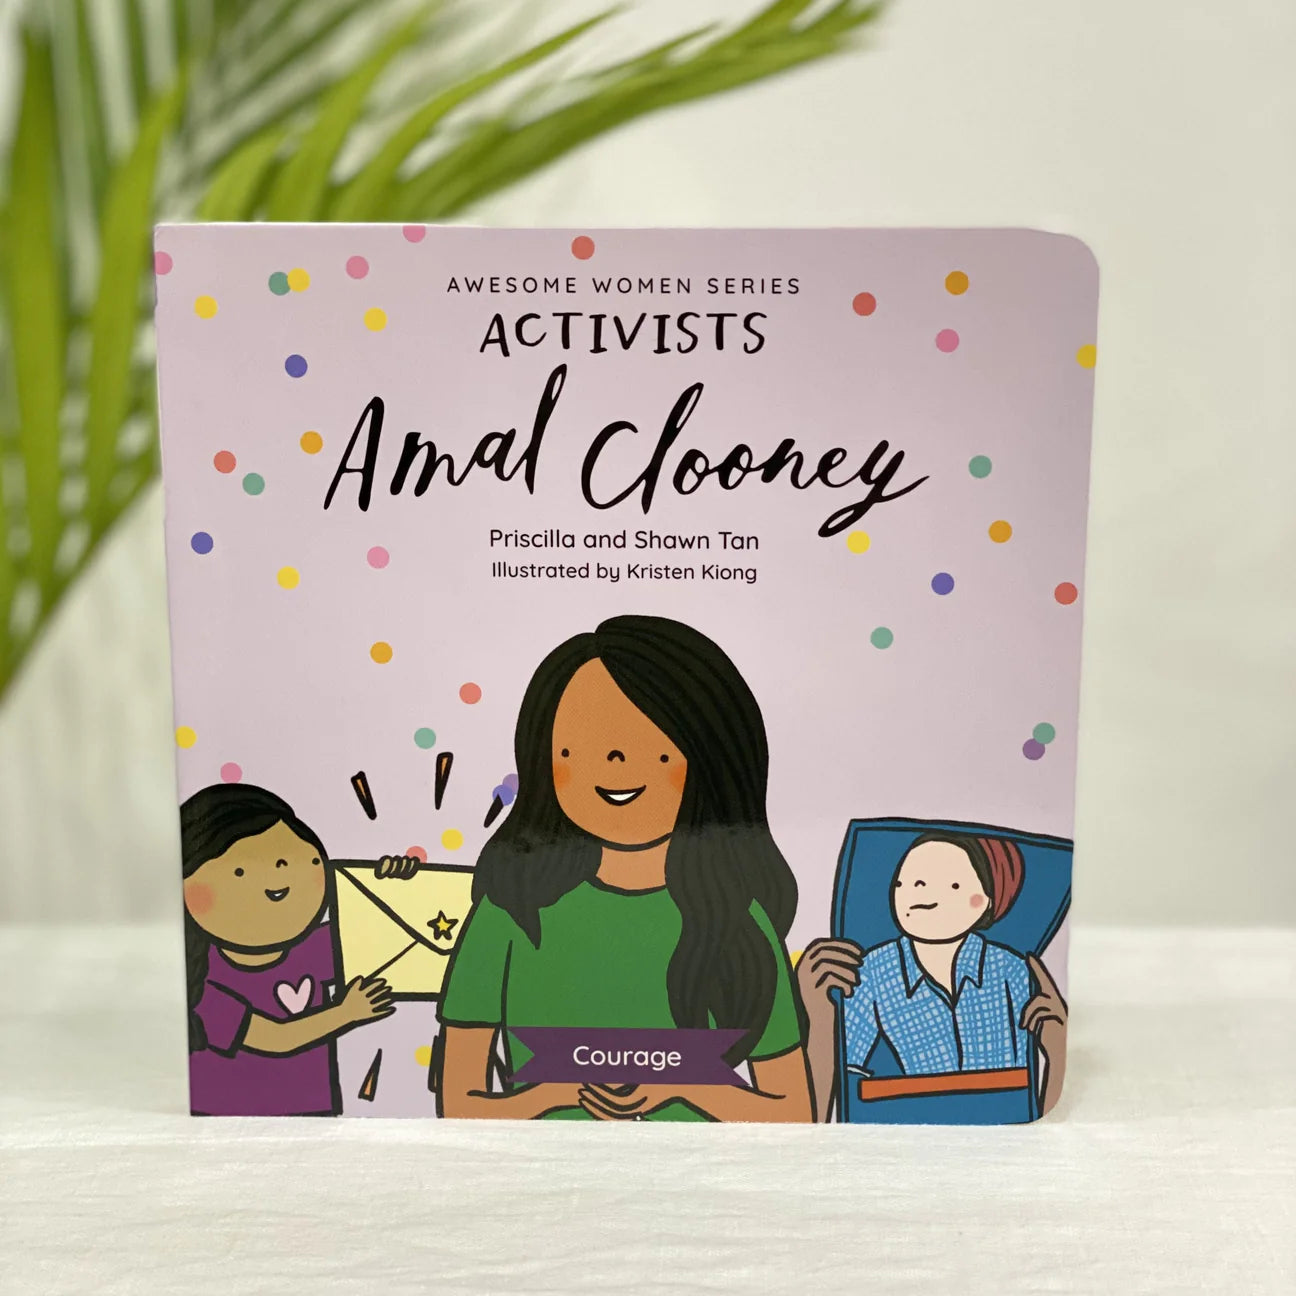 Awesome Women Series Activists | Amal Clooney